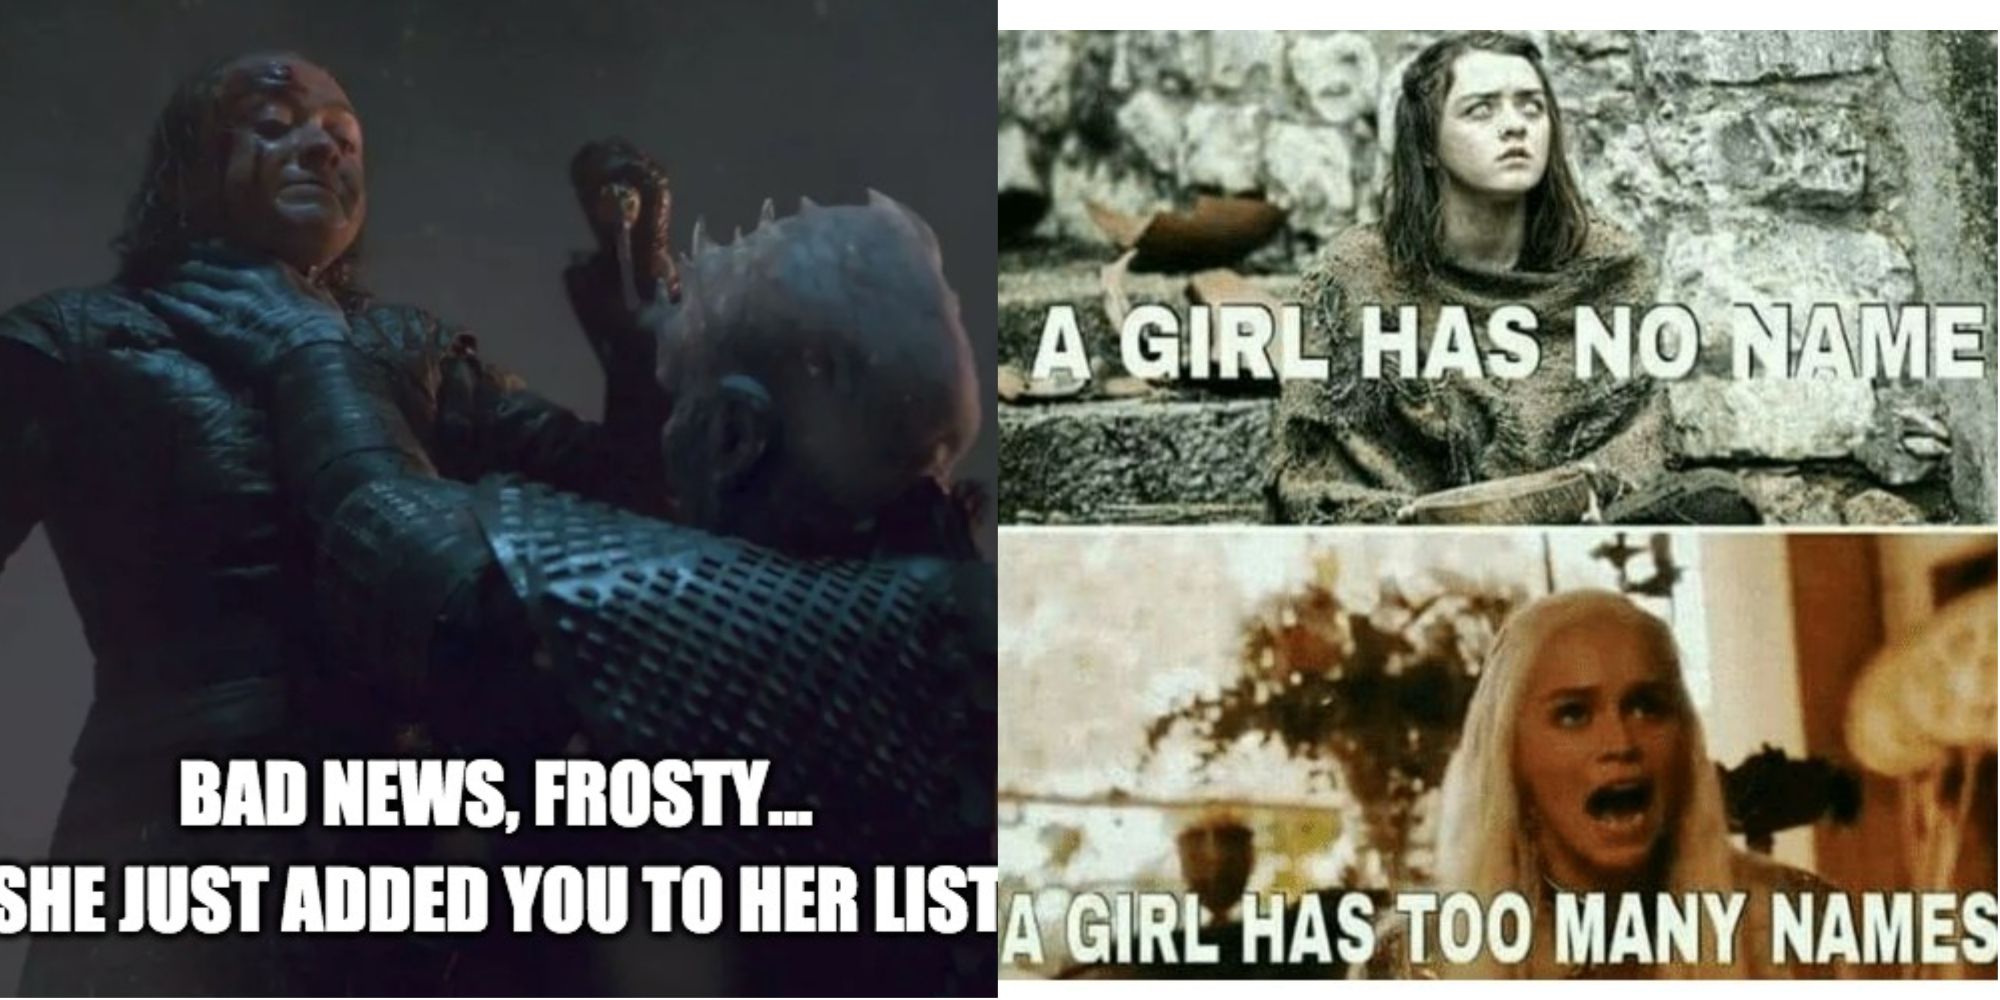 The Greatest Game of Thrones Memes The Internet Has To Offer